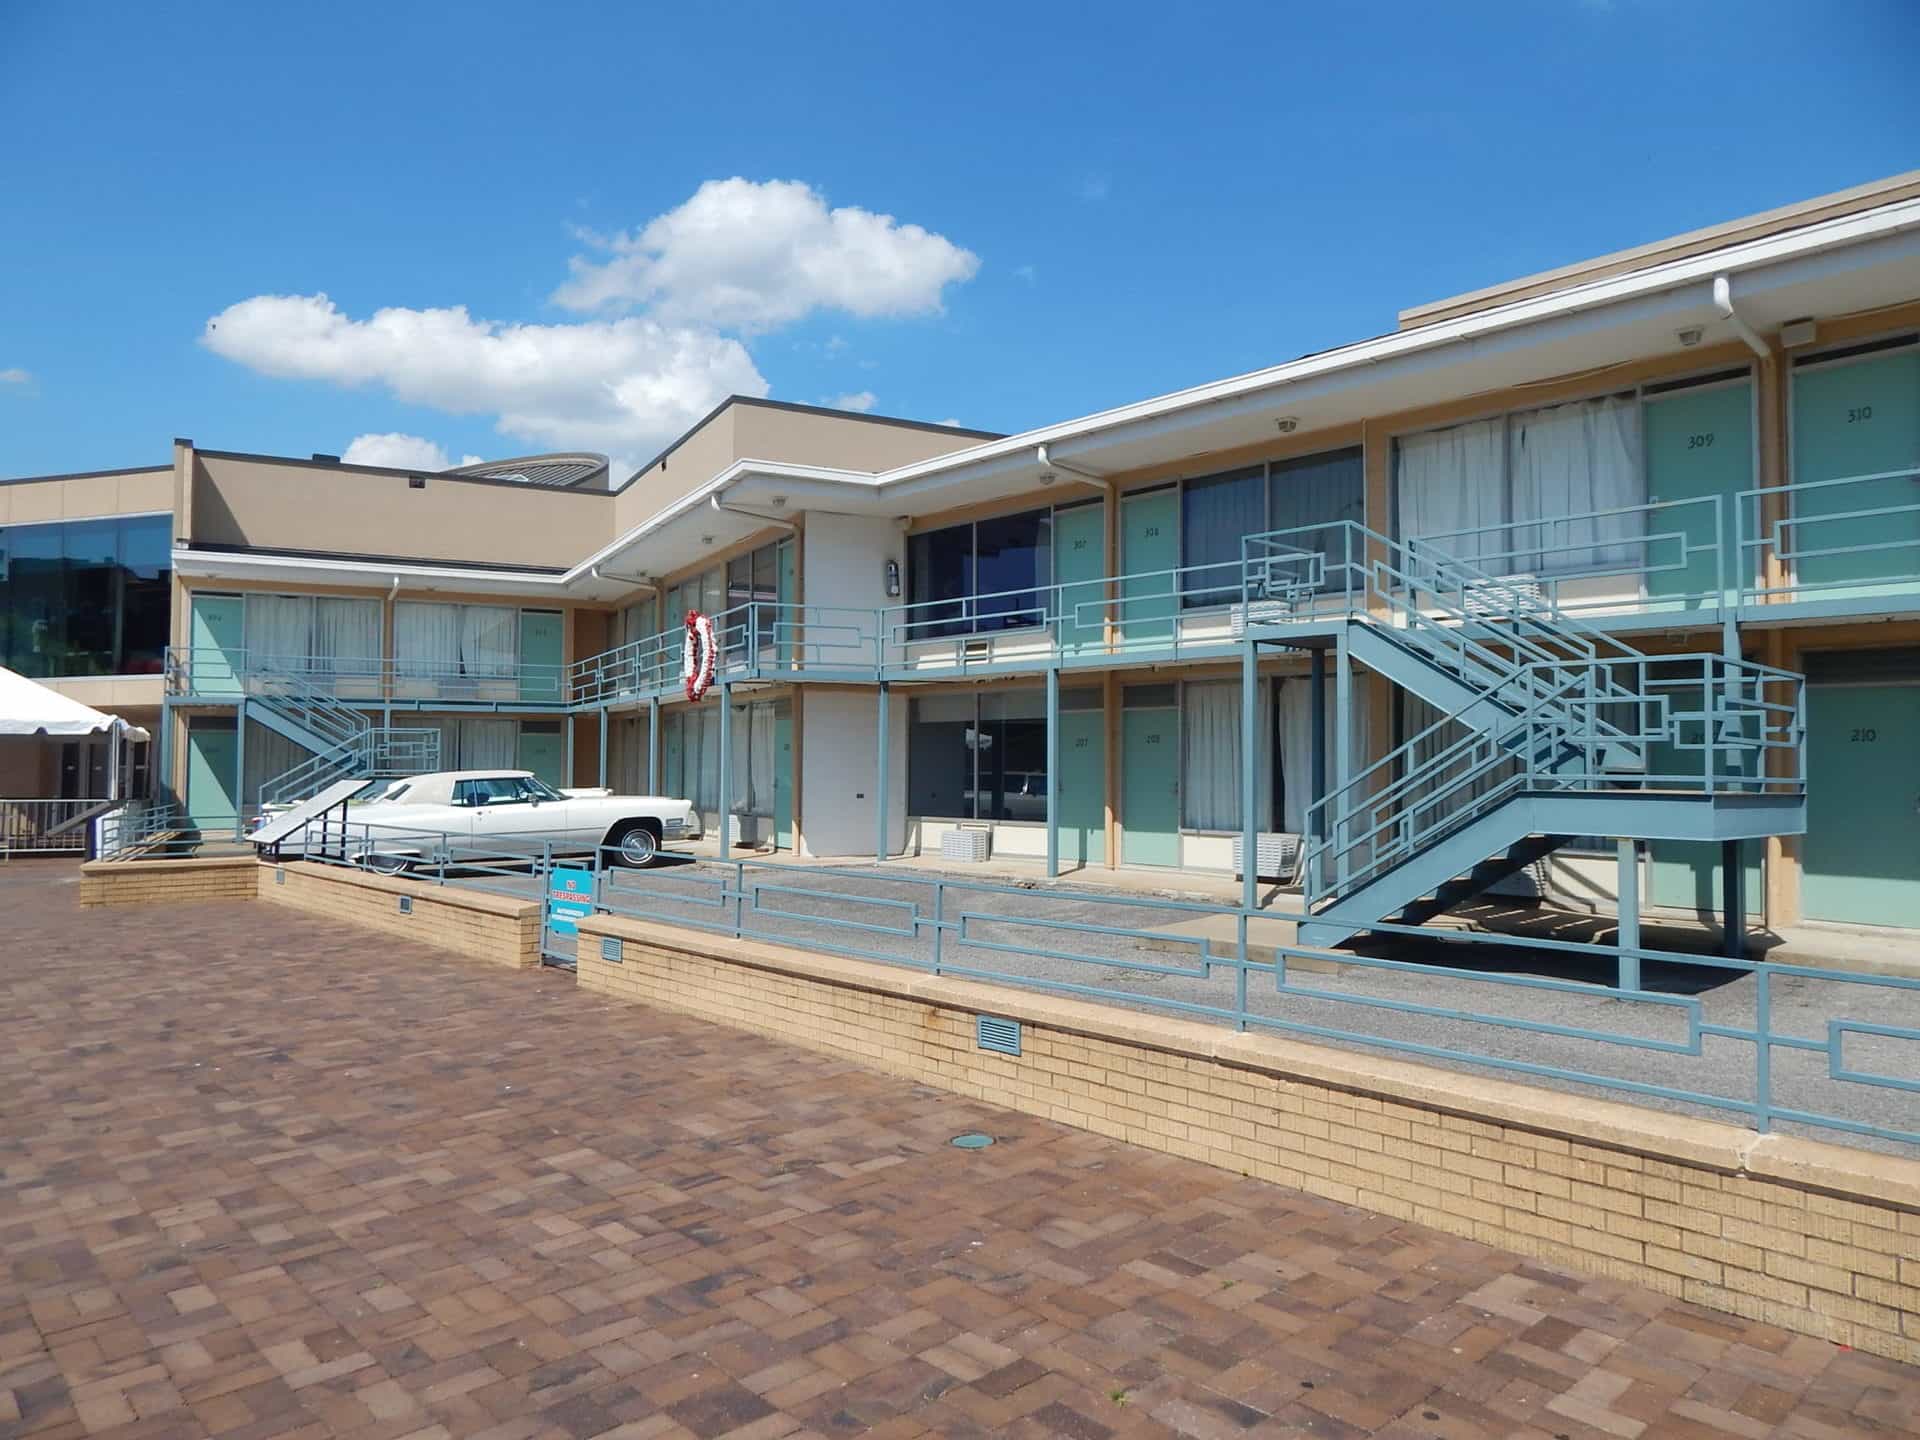 The National Civil Rights Museum - Lorraine Motel